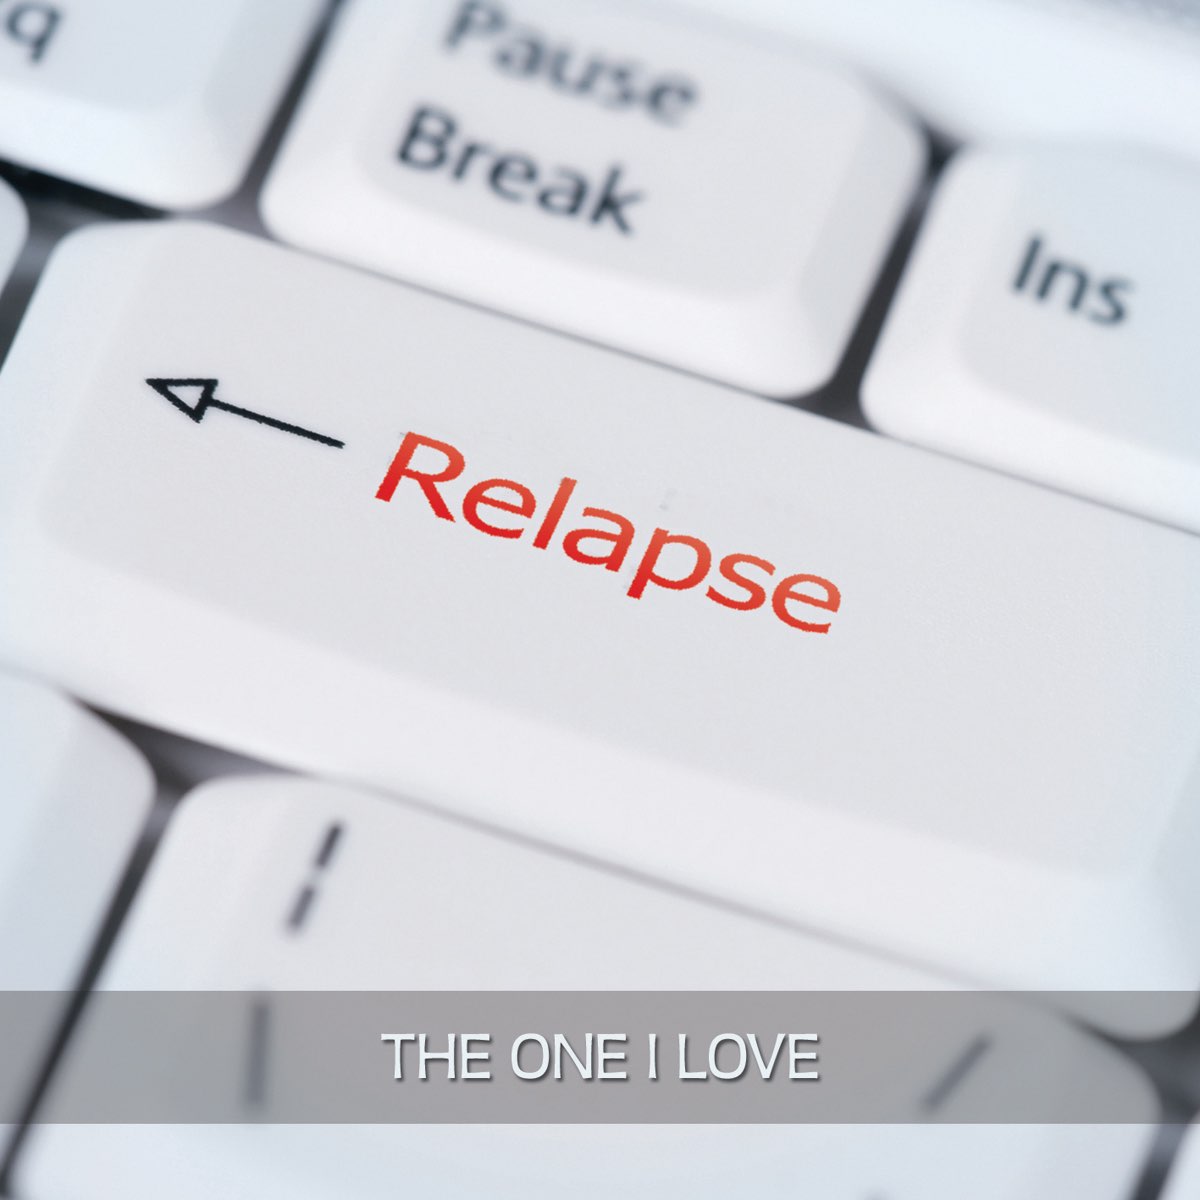 The One I Love by Relapse on Apple Music